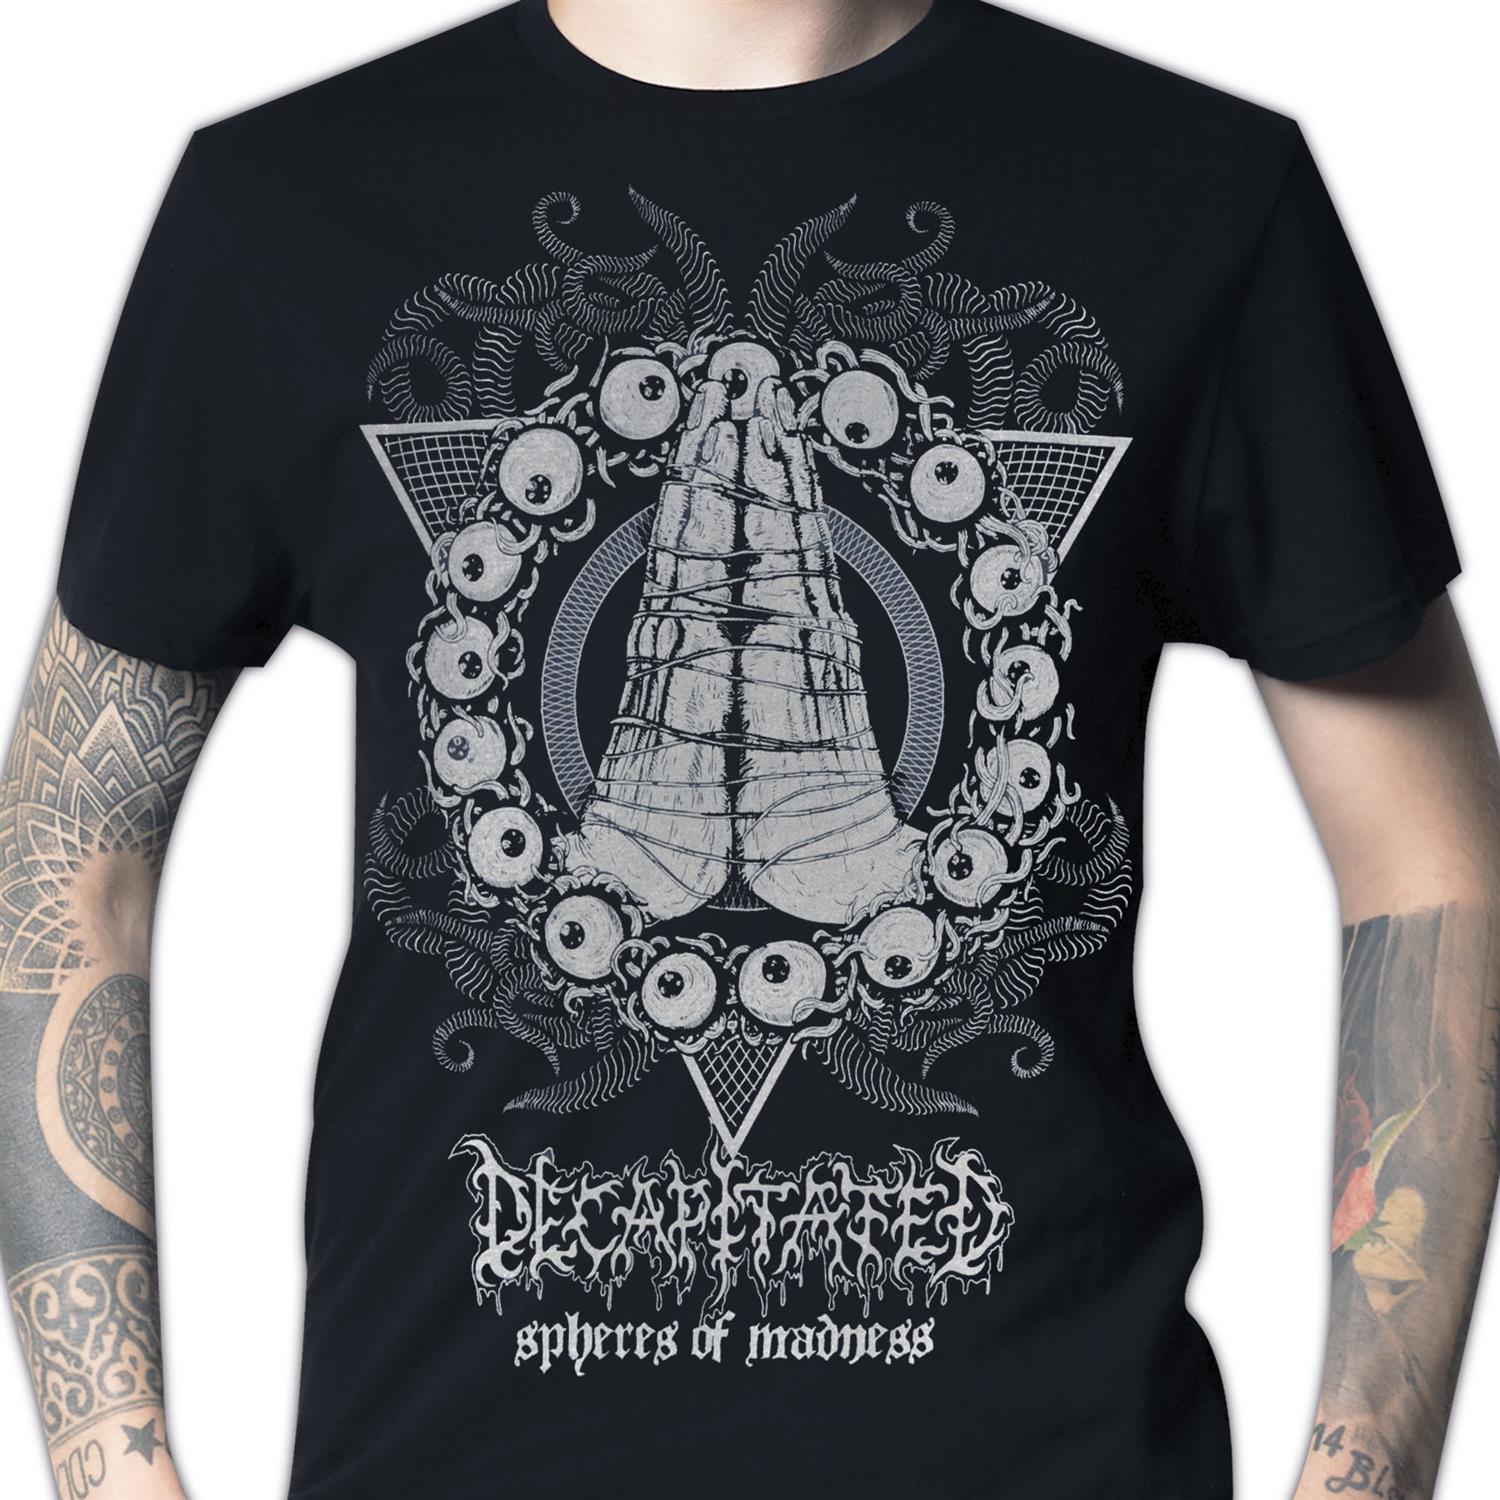 Spheres Of Madness (Import) T-Shirt